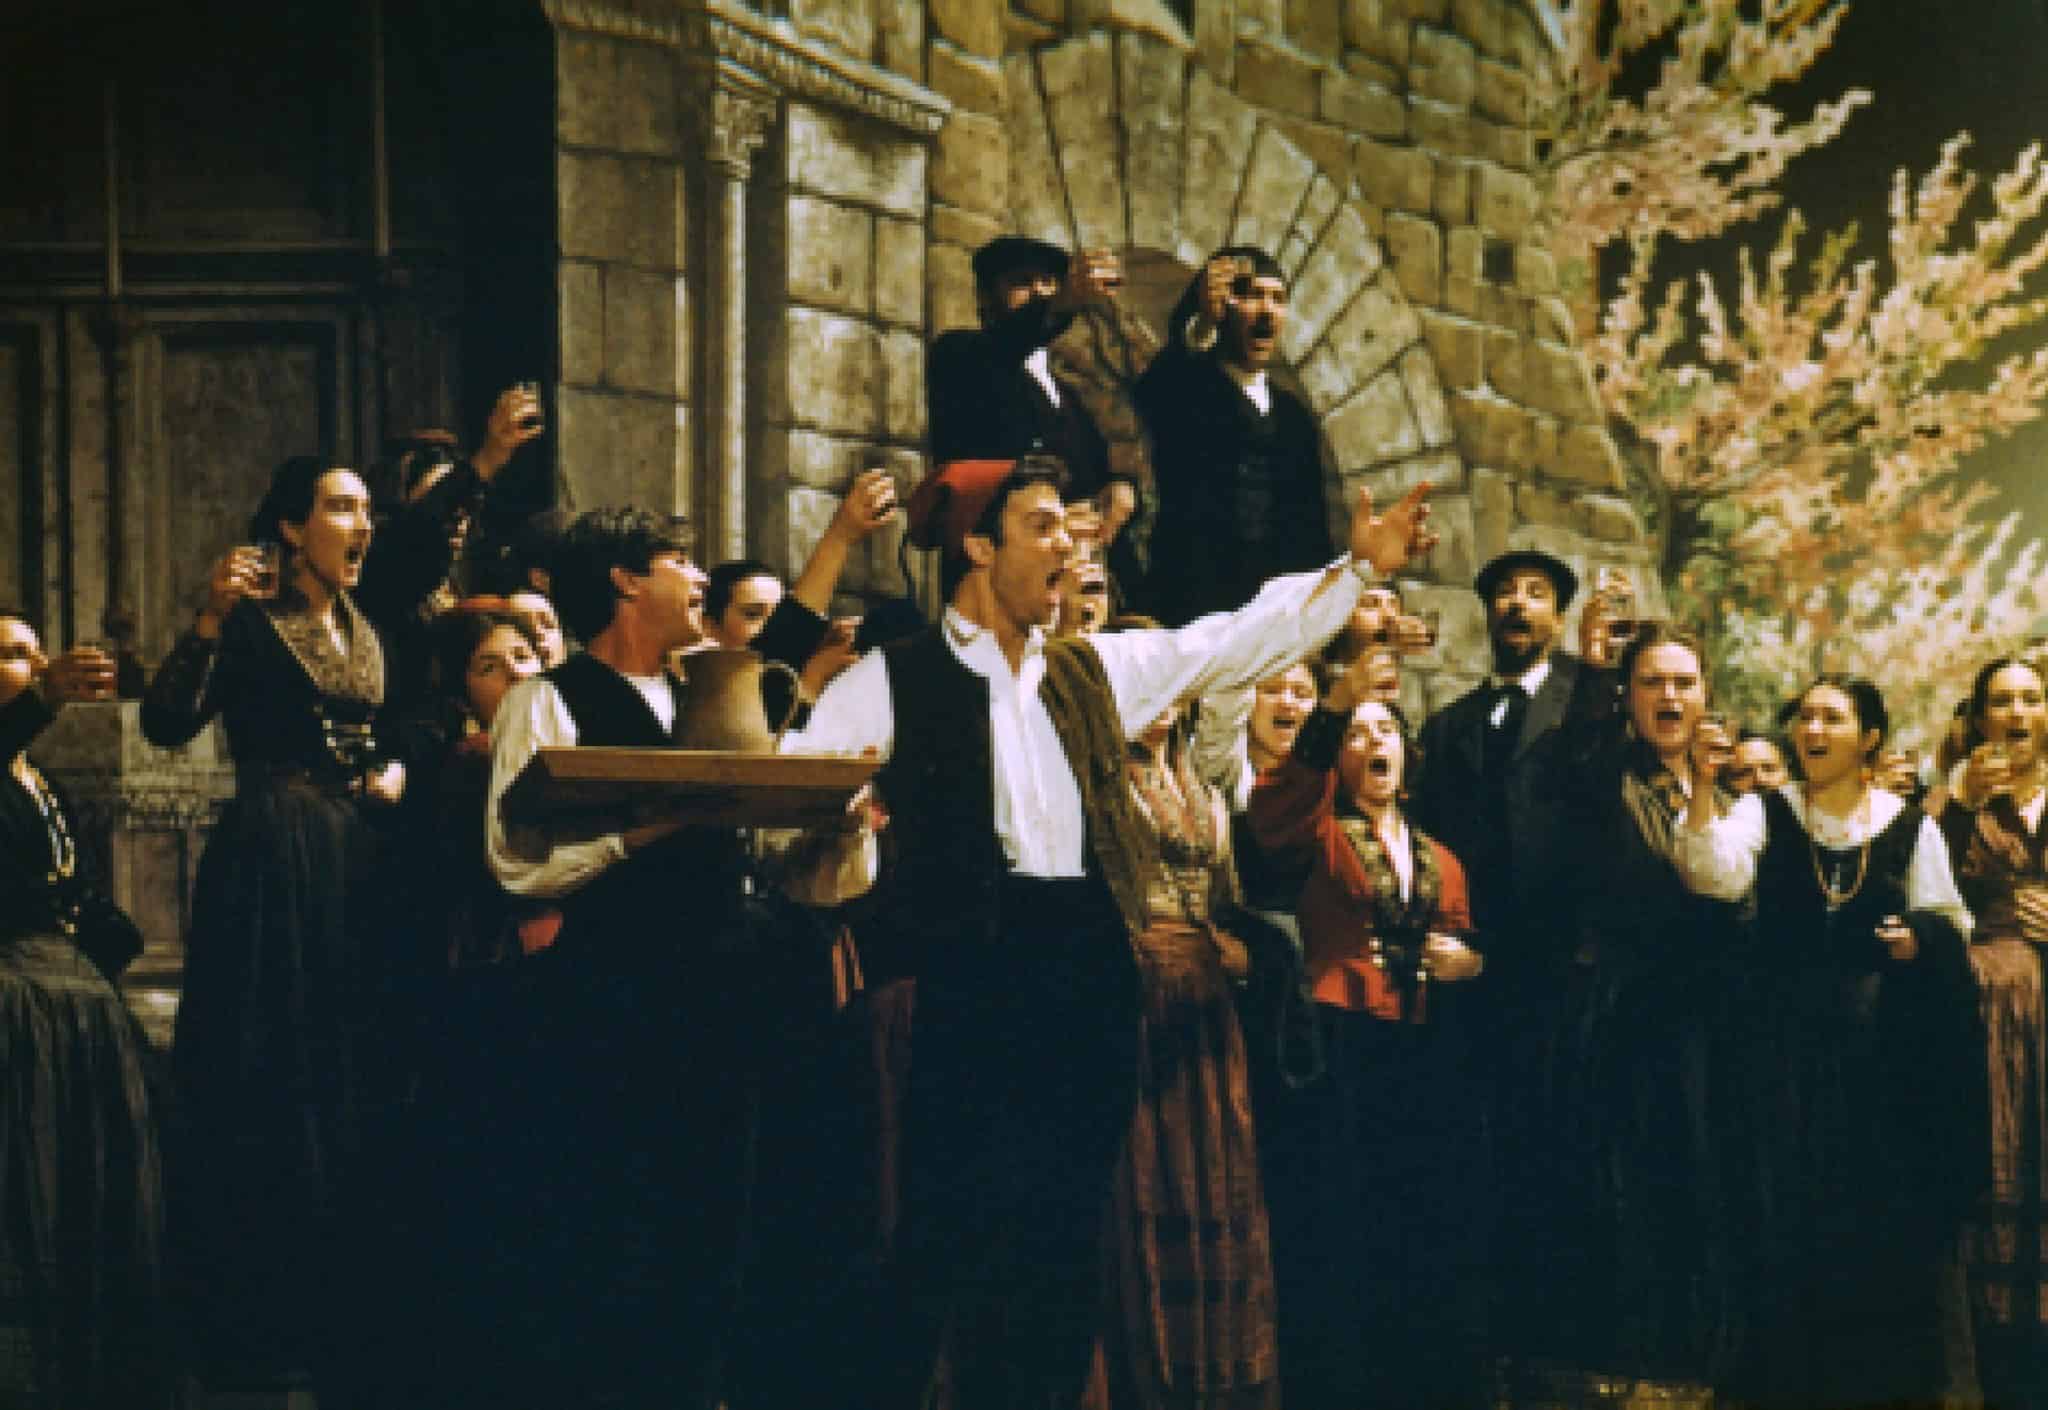 Franc D'Ambrosio in The Godfather Part III (1990)